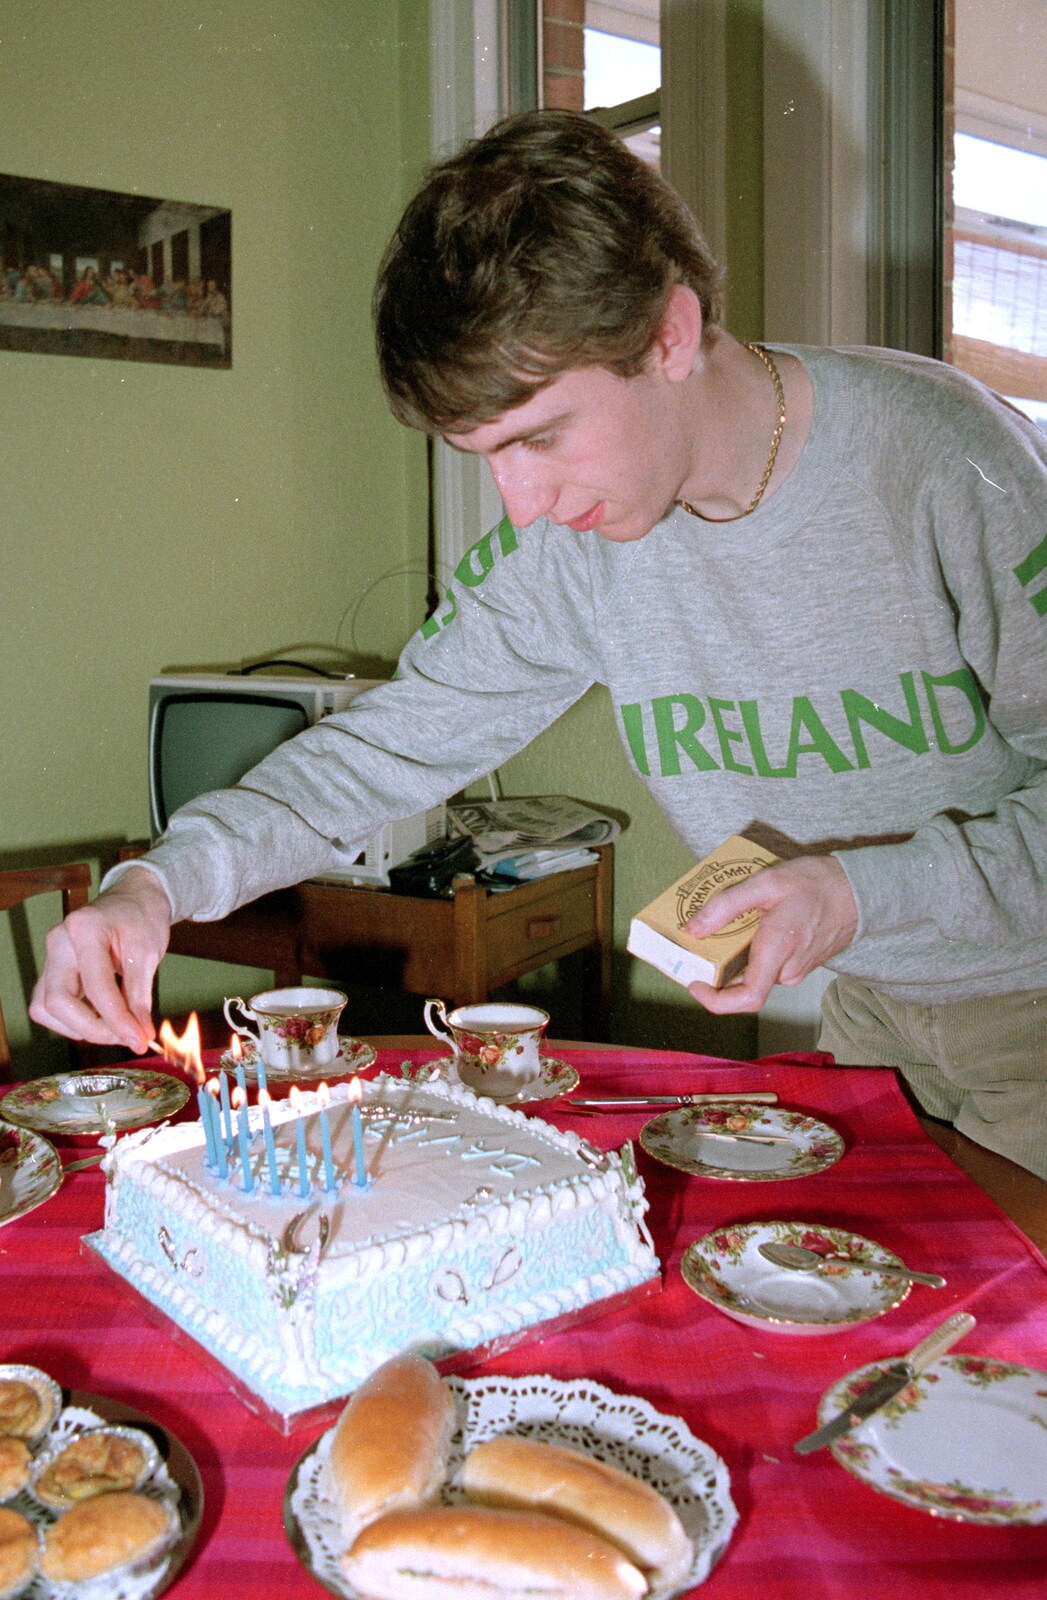 Dave sets fire to his cake from Trotsky's Birthday, New Malden, Kingston Upon Thames - 20th April 1986